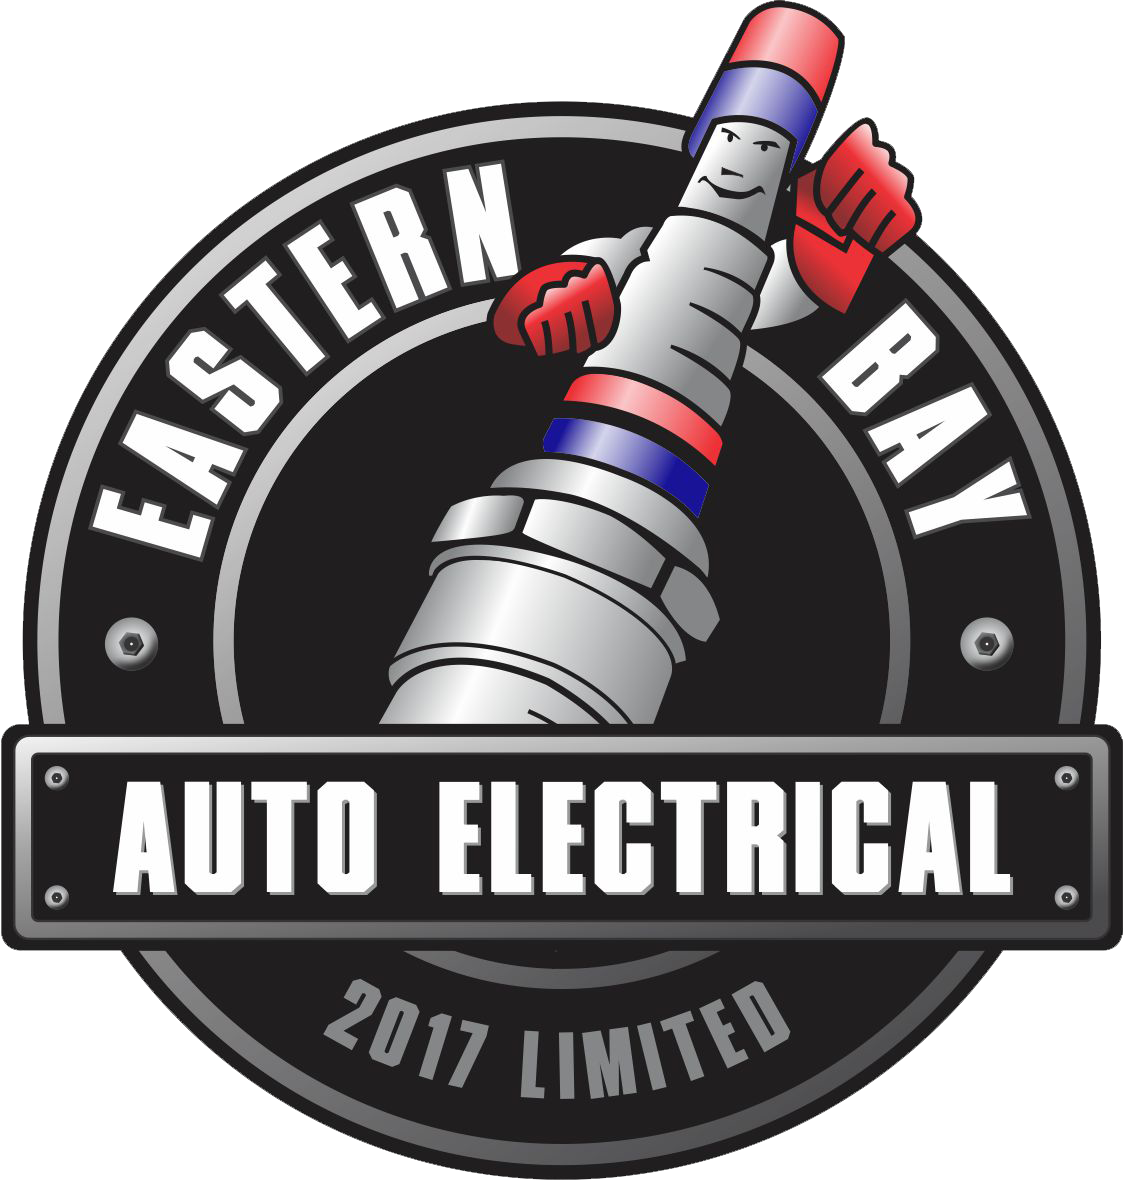 Eastern Bay Auto Electrical